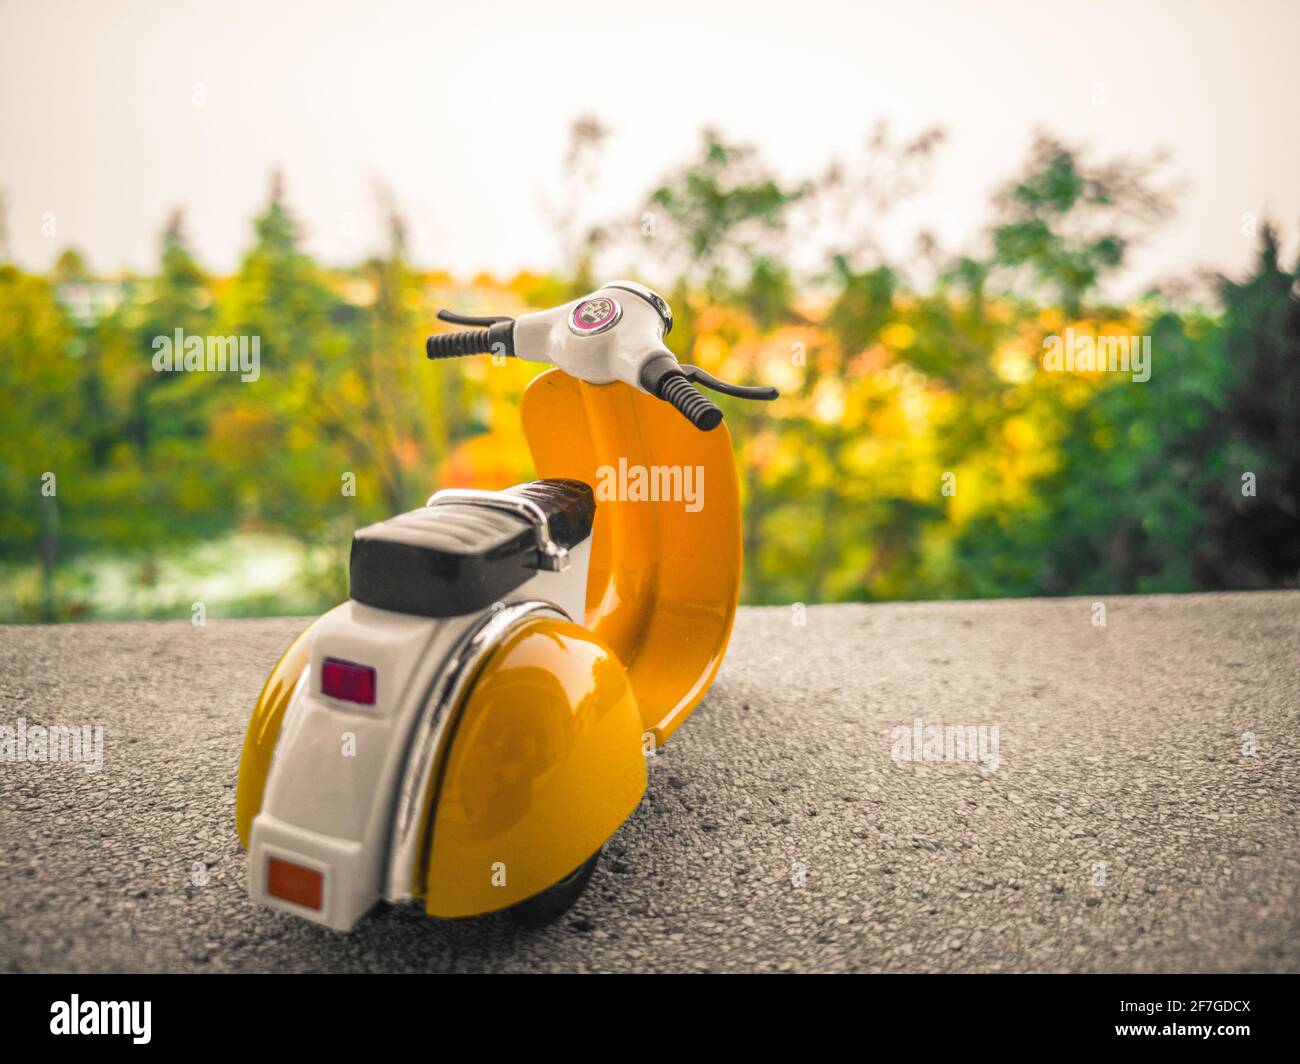 background with old toy scooter in vintage Italian style Stock Photo